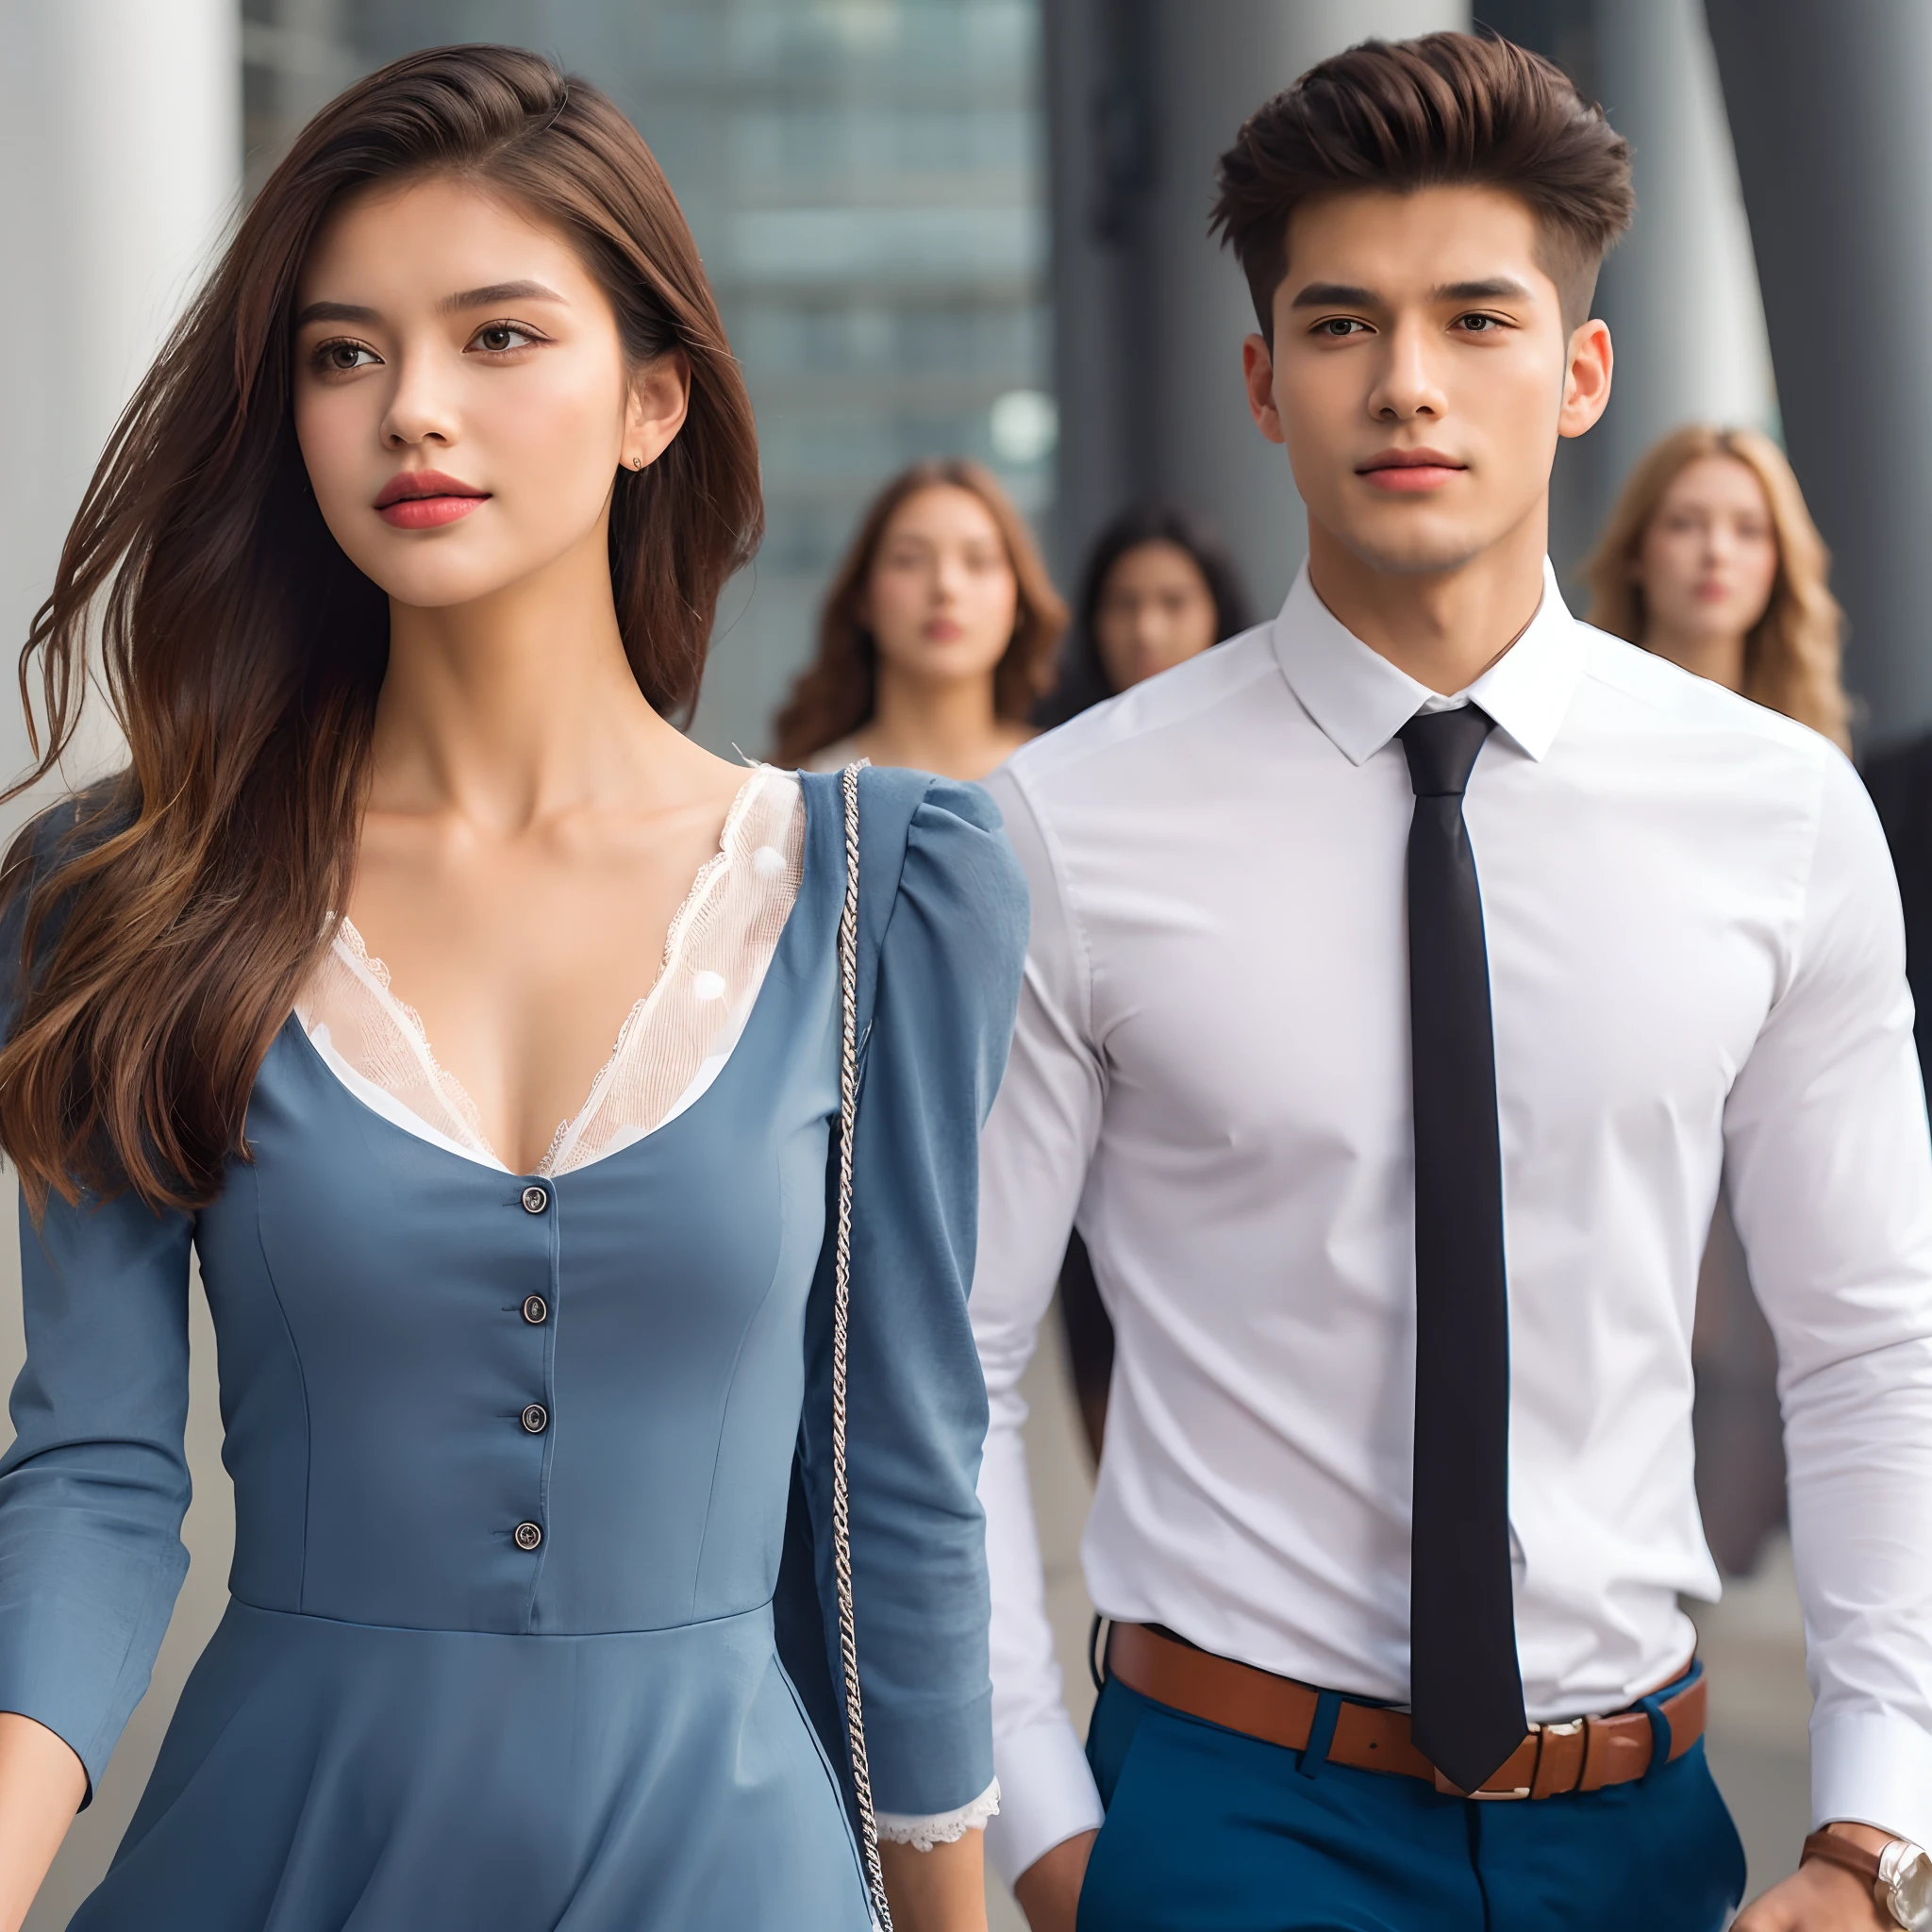 A beautiful young woman in a modern dress, followed by a male student wearing a white long- sleeved shirt, blue pants, and a necktie, with a look of admiration on his face. The background has other people walking behind them.